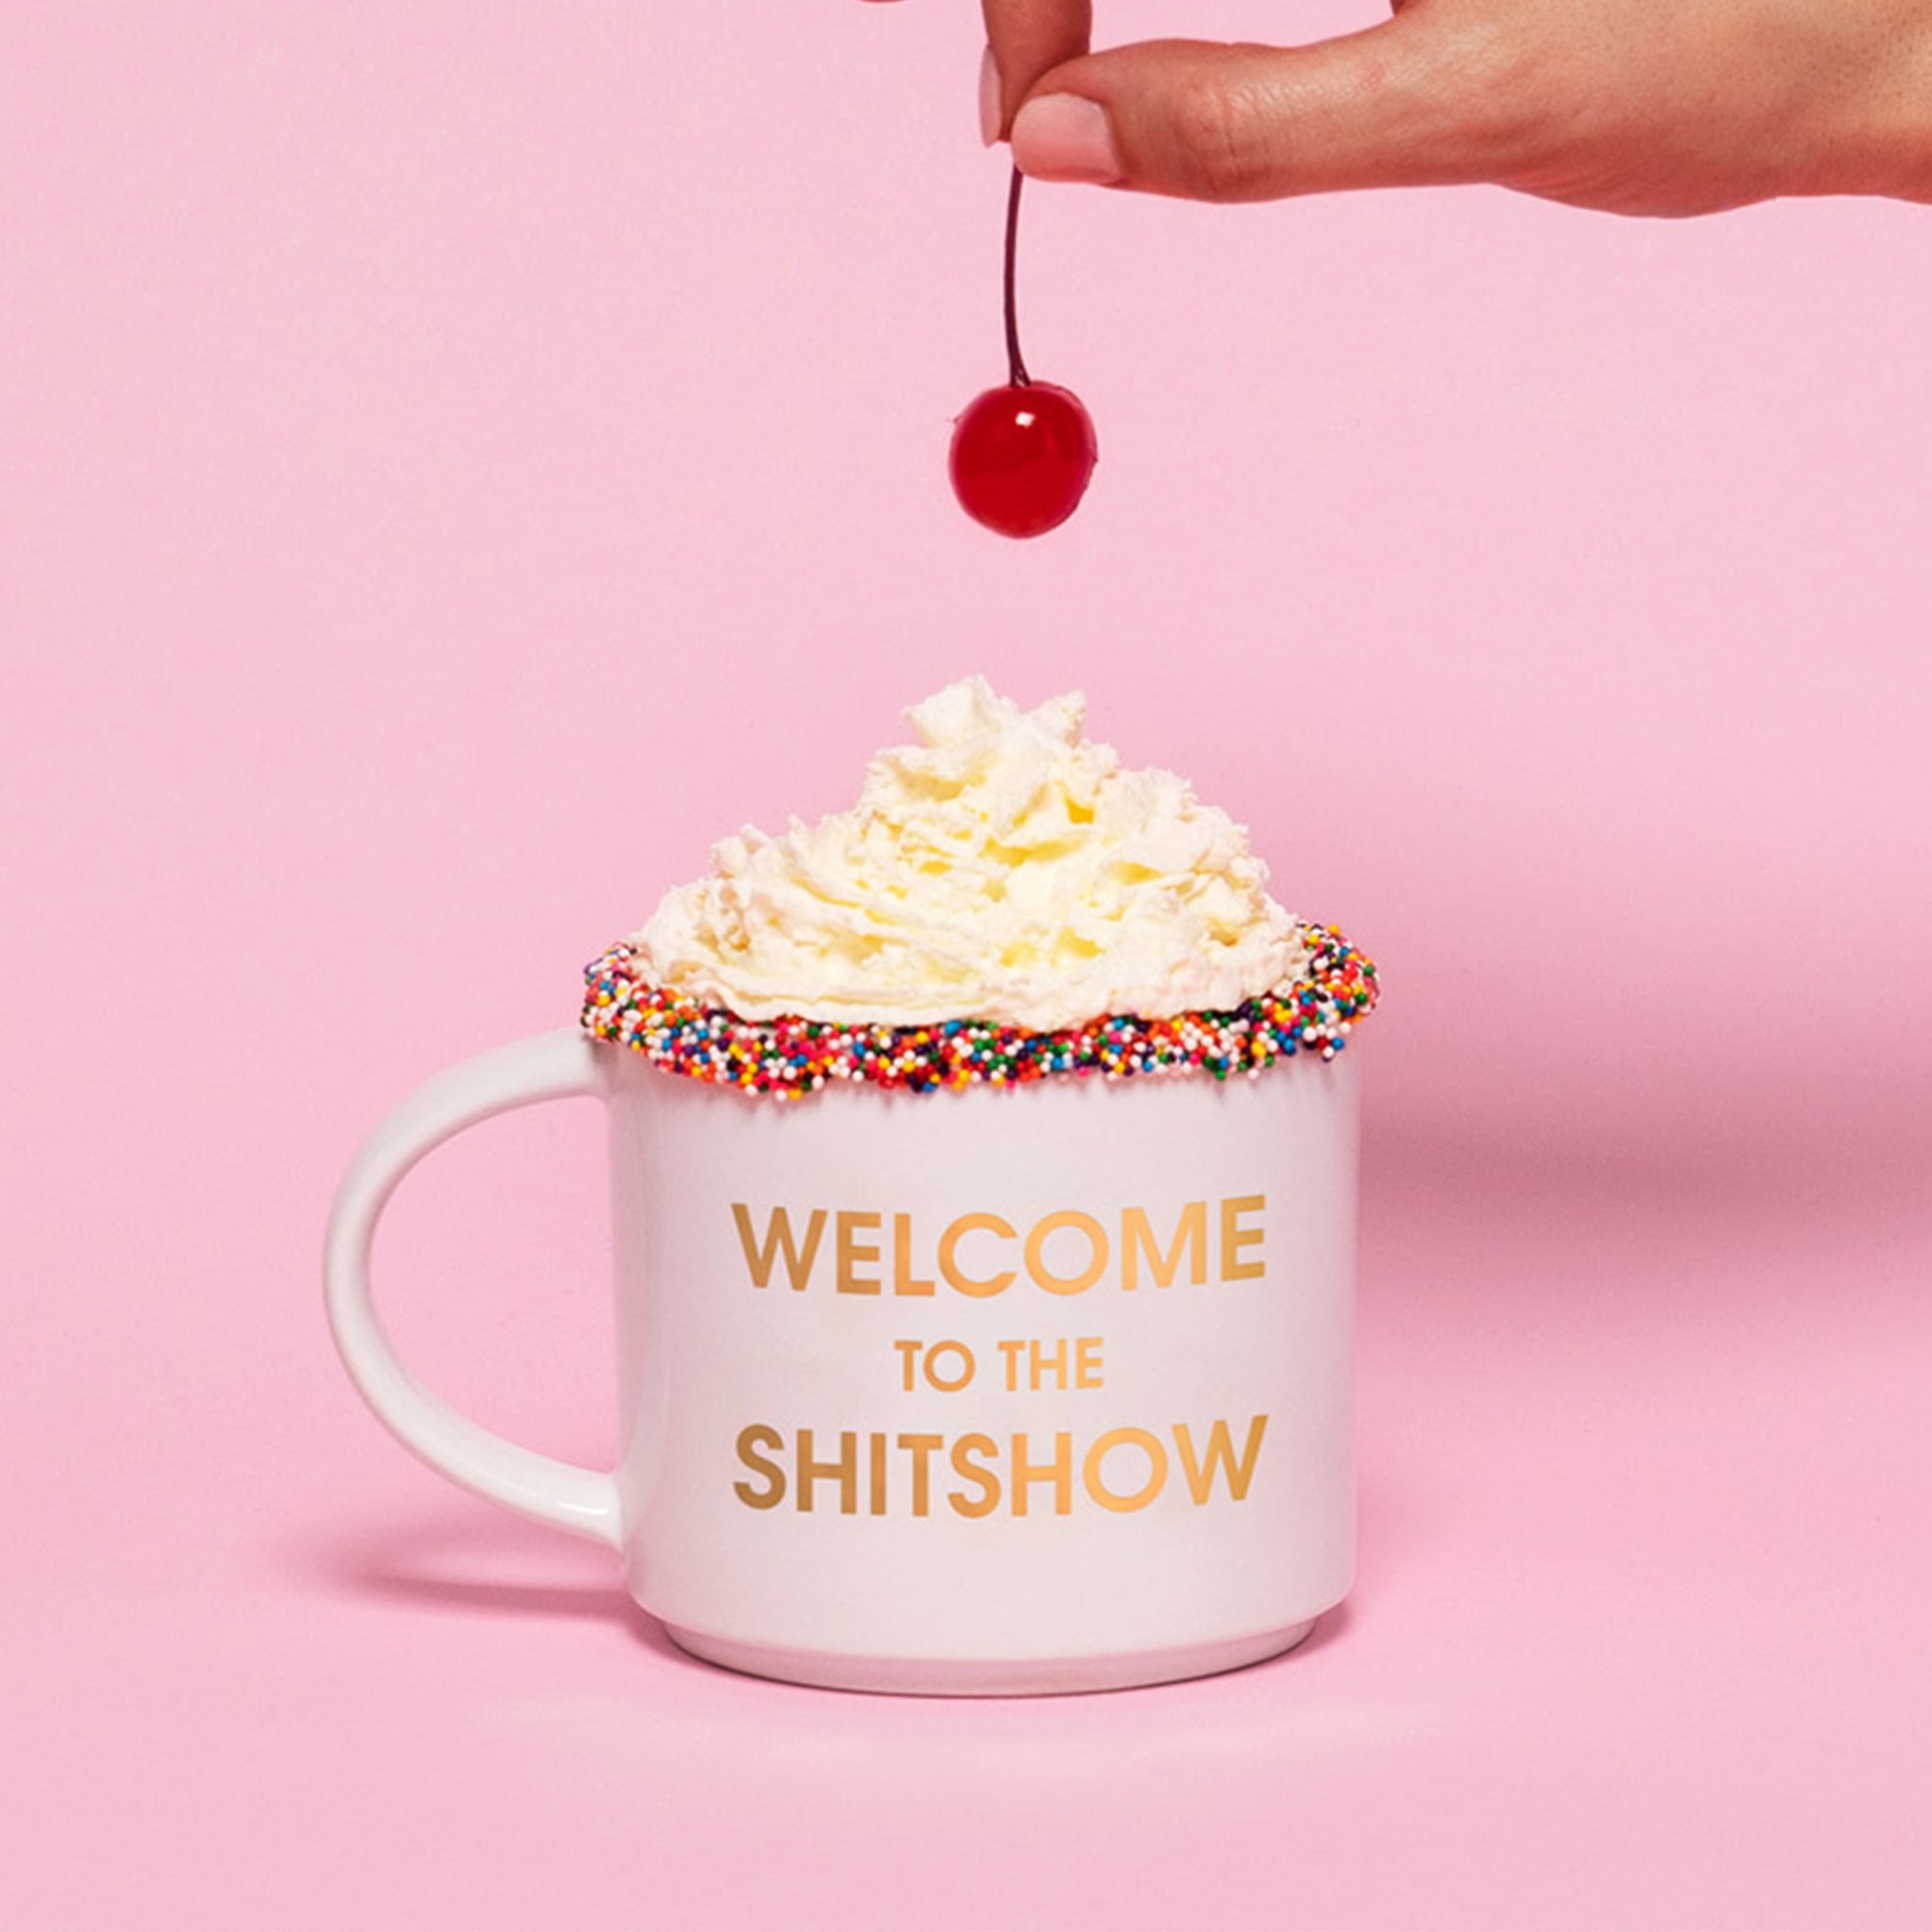 Classic white ceramic mug with a thin round handle labeled 'Welcome to the Shitshow' in reflective gold lettering.